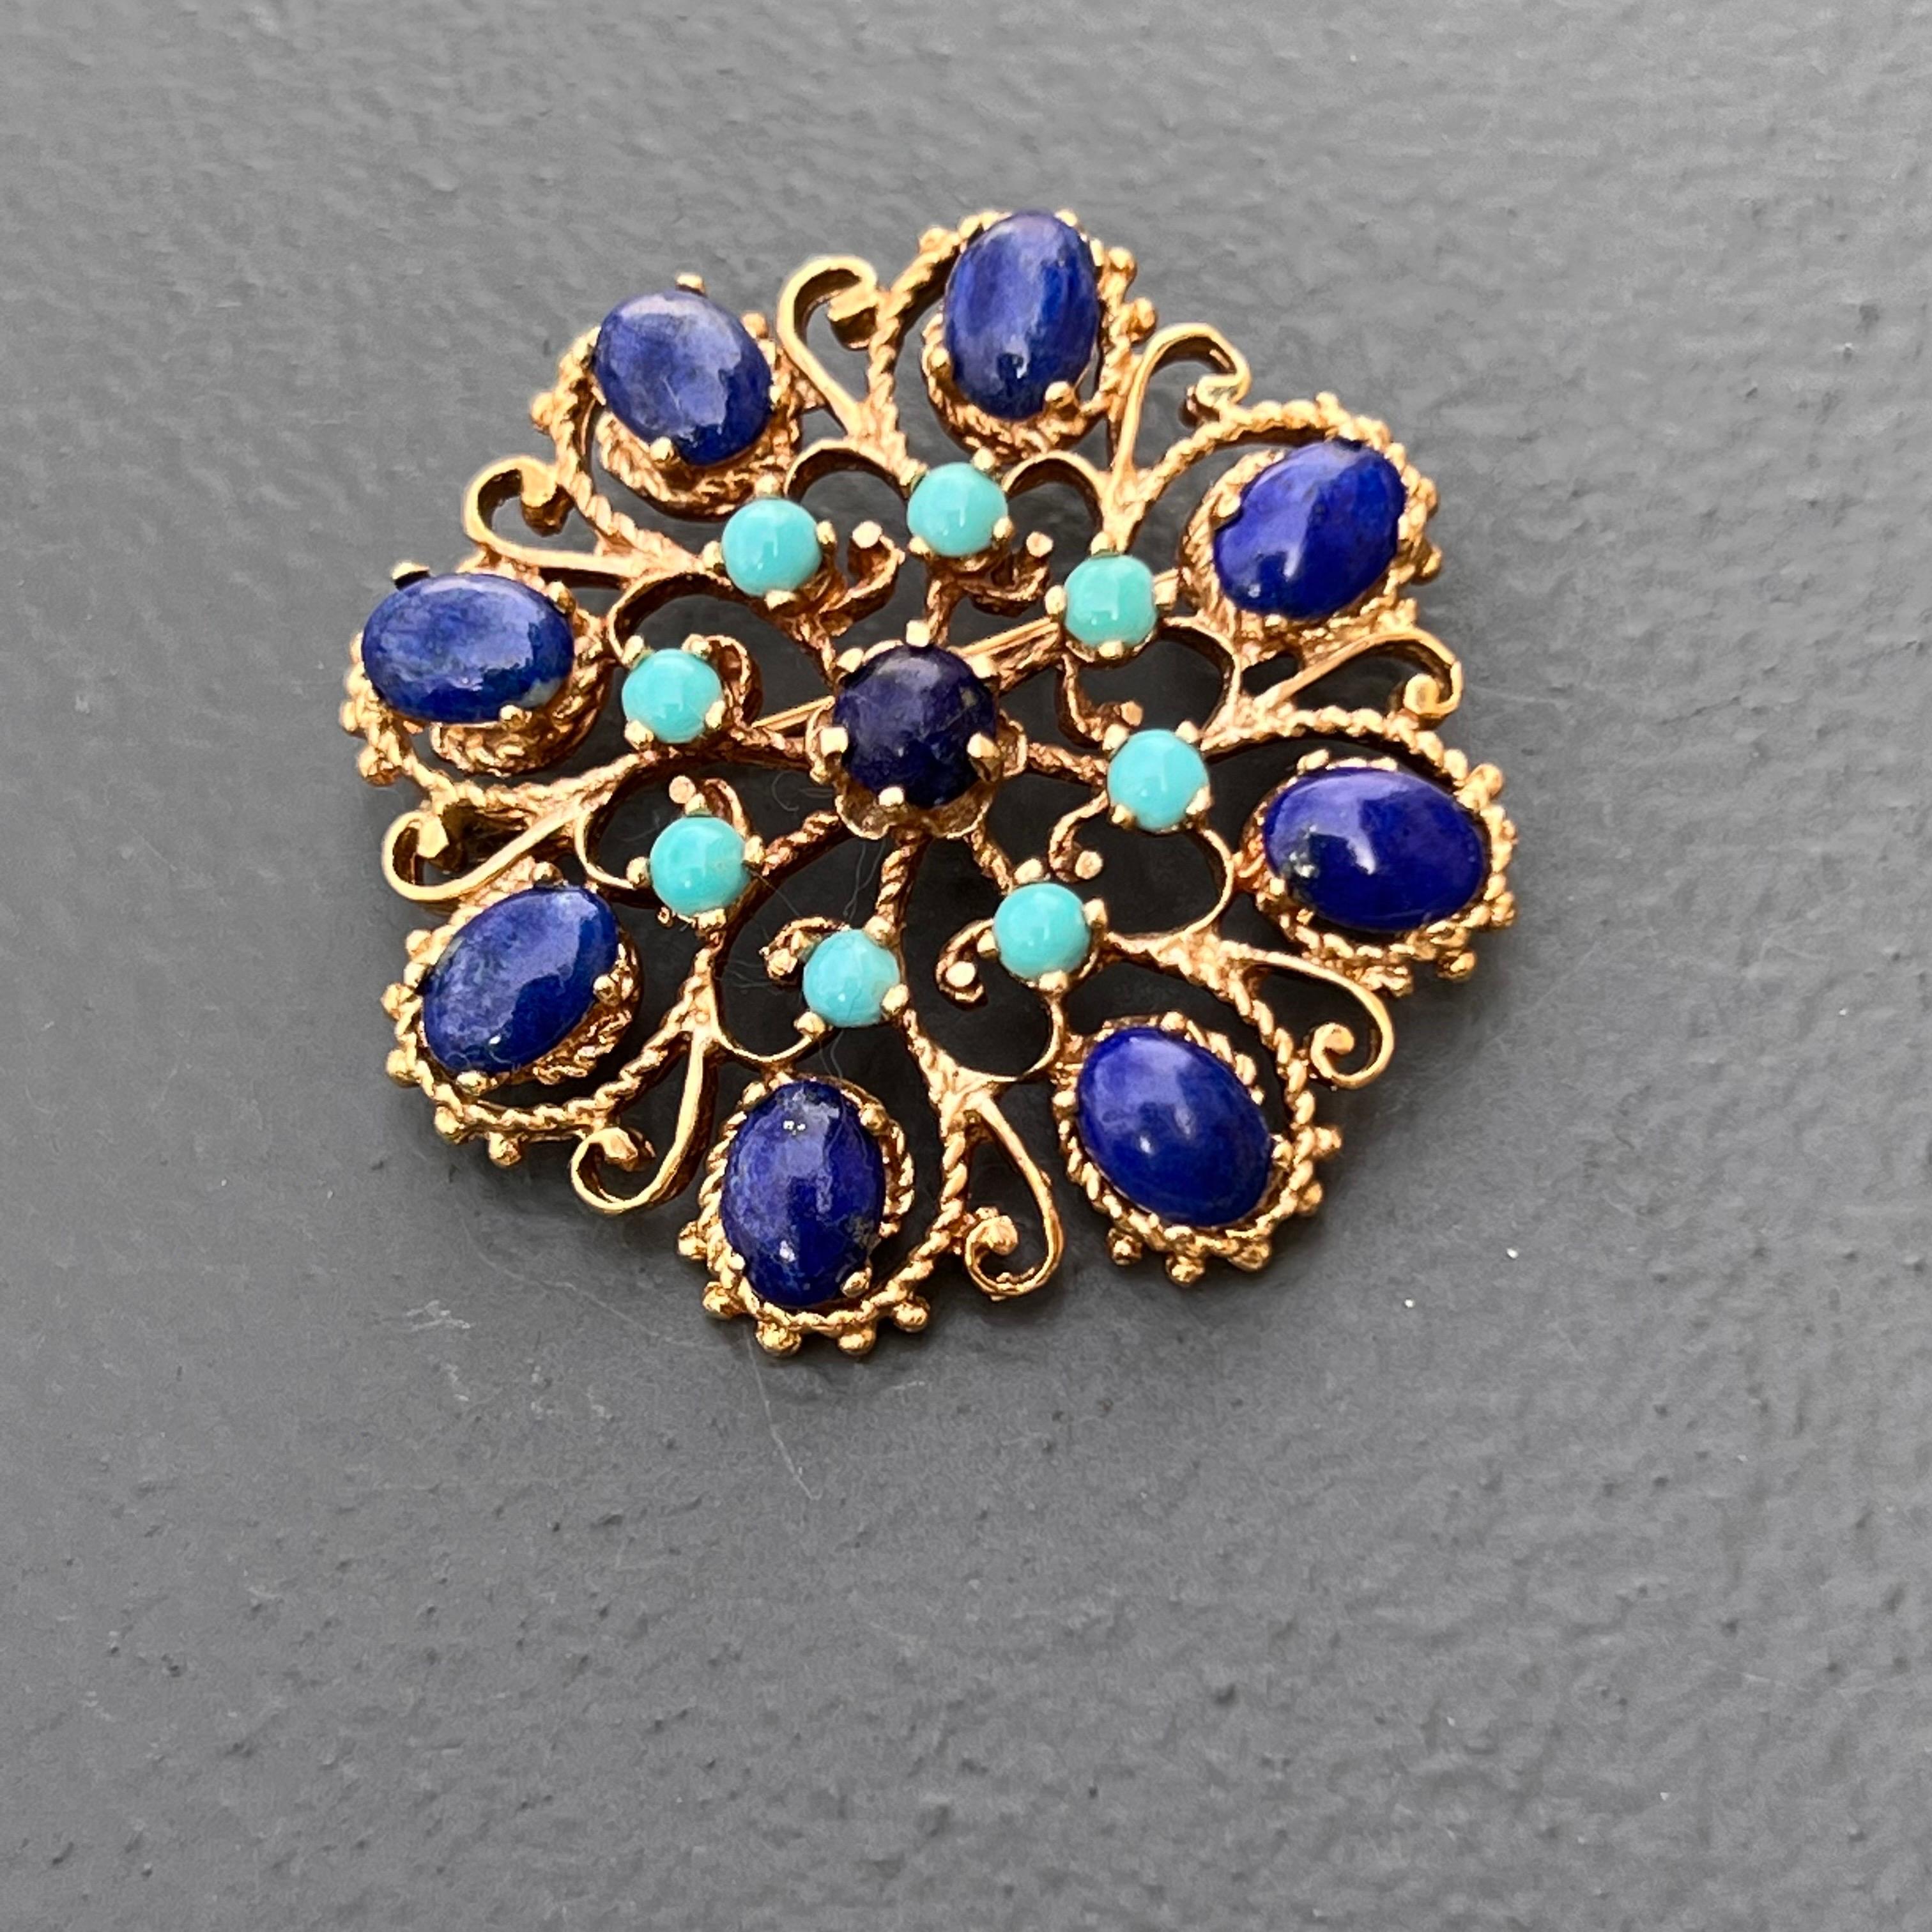 Mixed Cut 14 Karat Gold Turquoise and Lapis Victorian  Revival Brooch For Sale